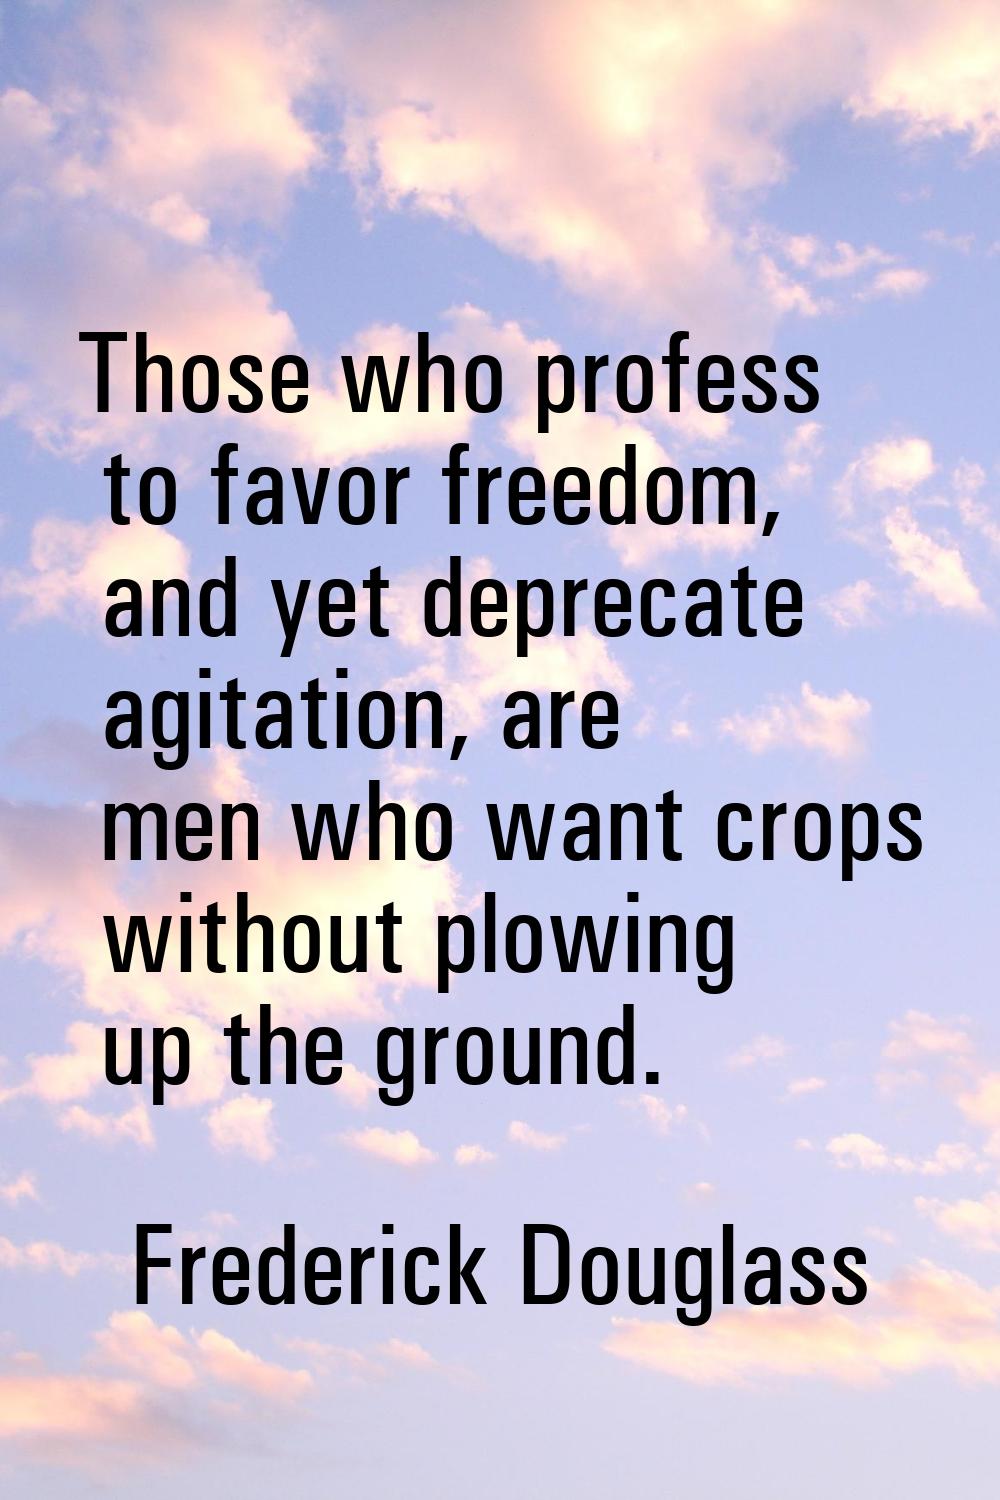 Those who profess to favor freedom, and yet deprecate agitation, are men who want crops without plo